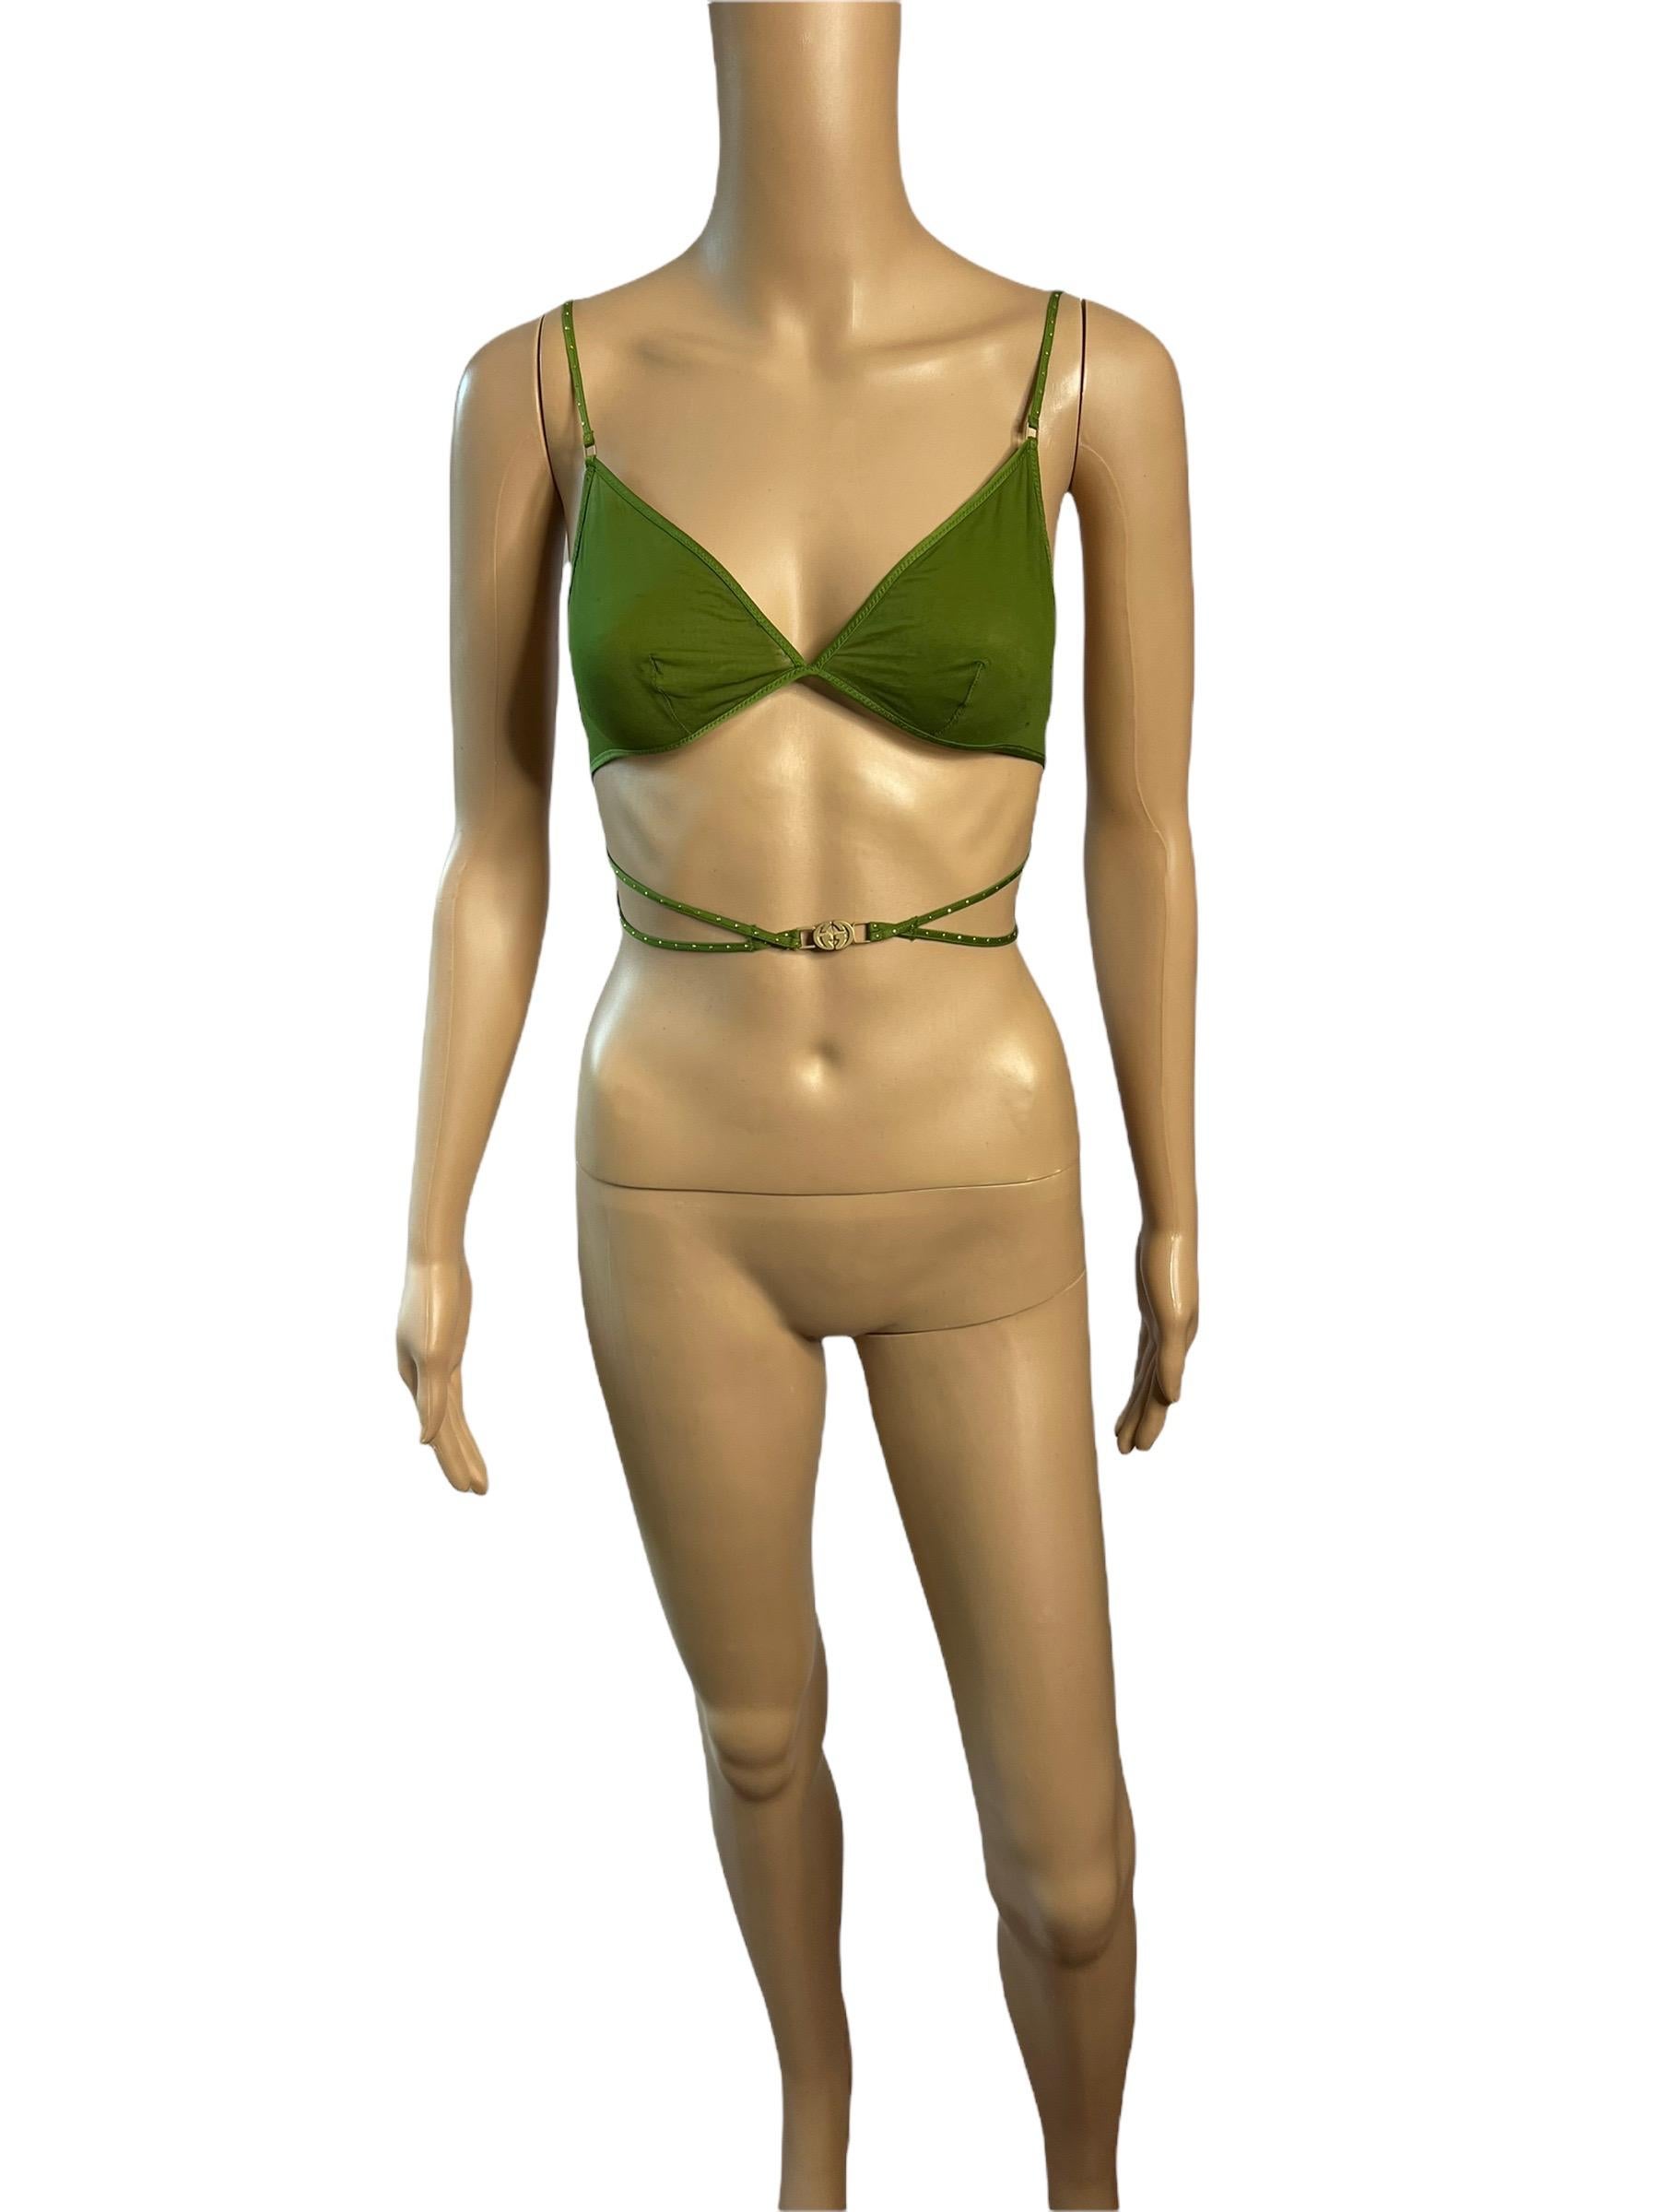 Tom Ford for Gucci F/W 2003 Bondage Studded Wrap Sheer Green Lingerie Bra In Fair Condition For Sale In Naples, FL